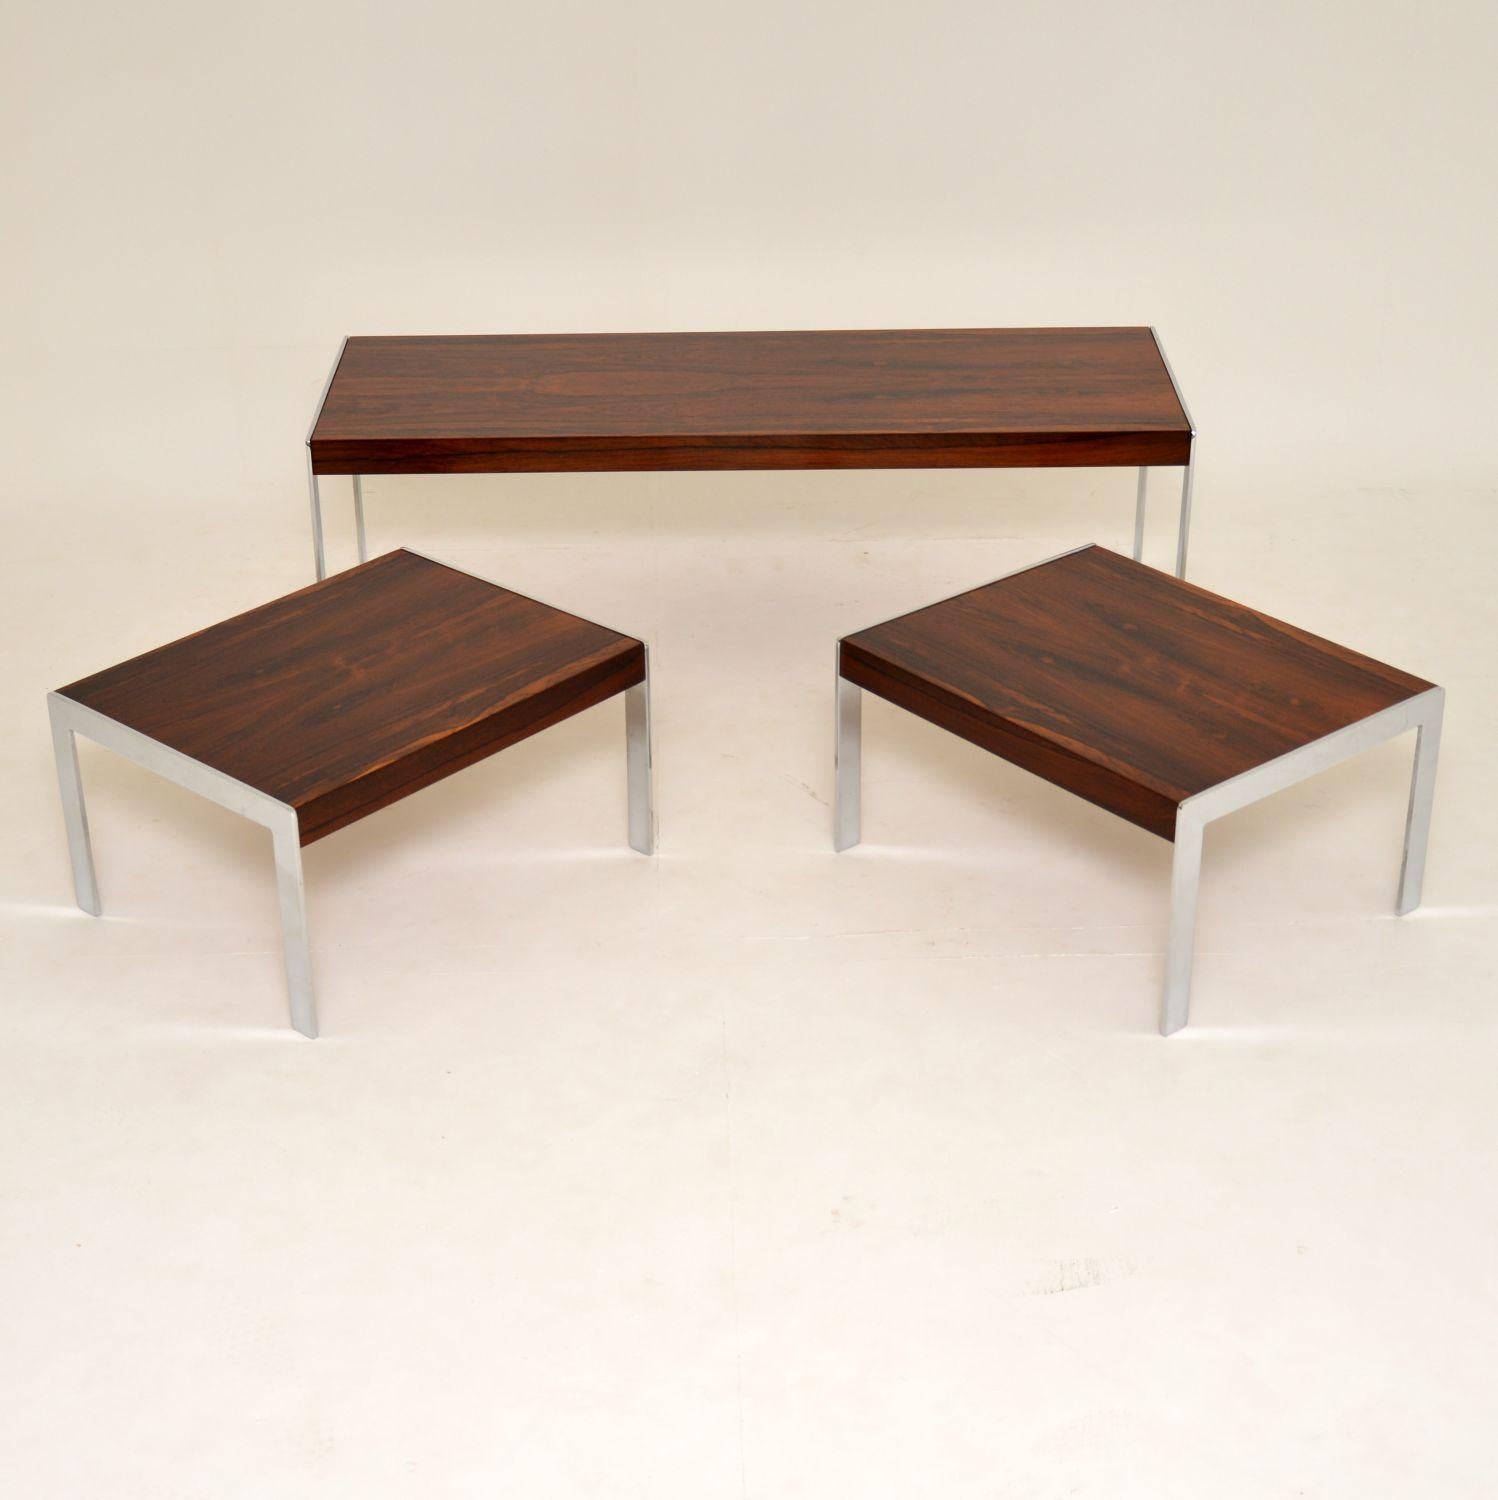 A stunning vintage nesting coffee table and side tables. These were made by Merrow Associates in the 1960s. They are made with wood tops and chrome legs, which beautifully contrast against each other. The quality is superb and the condition is